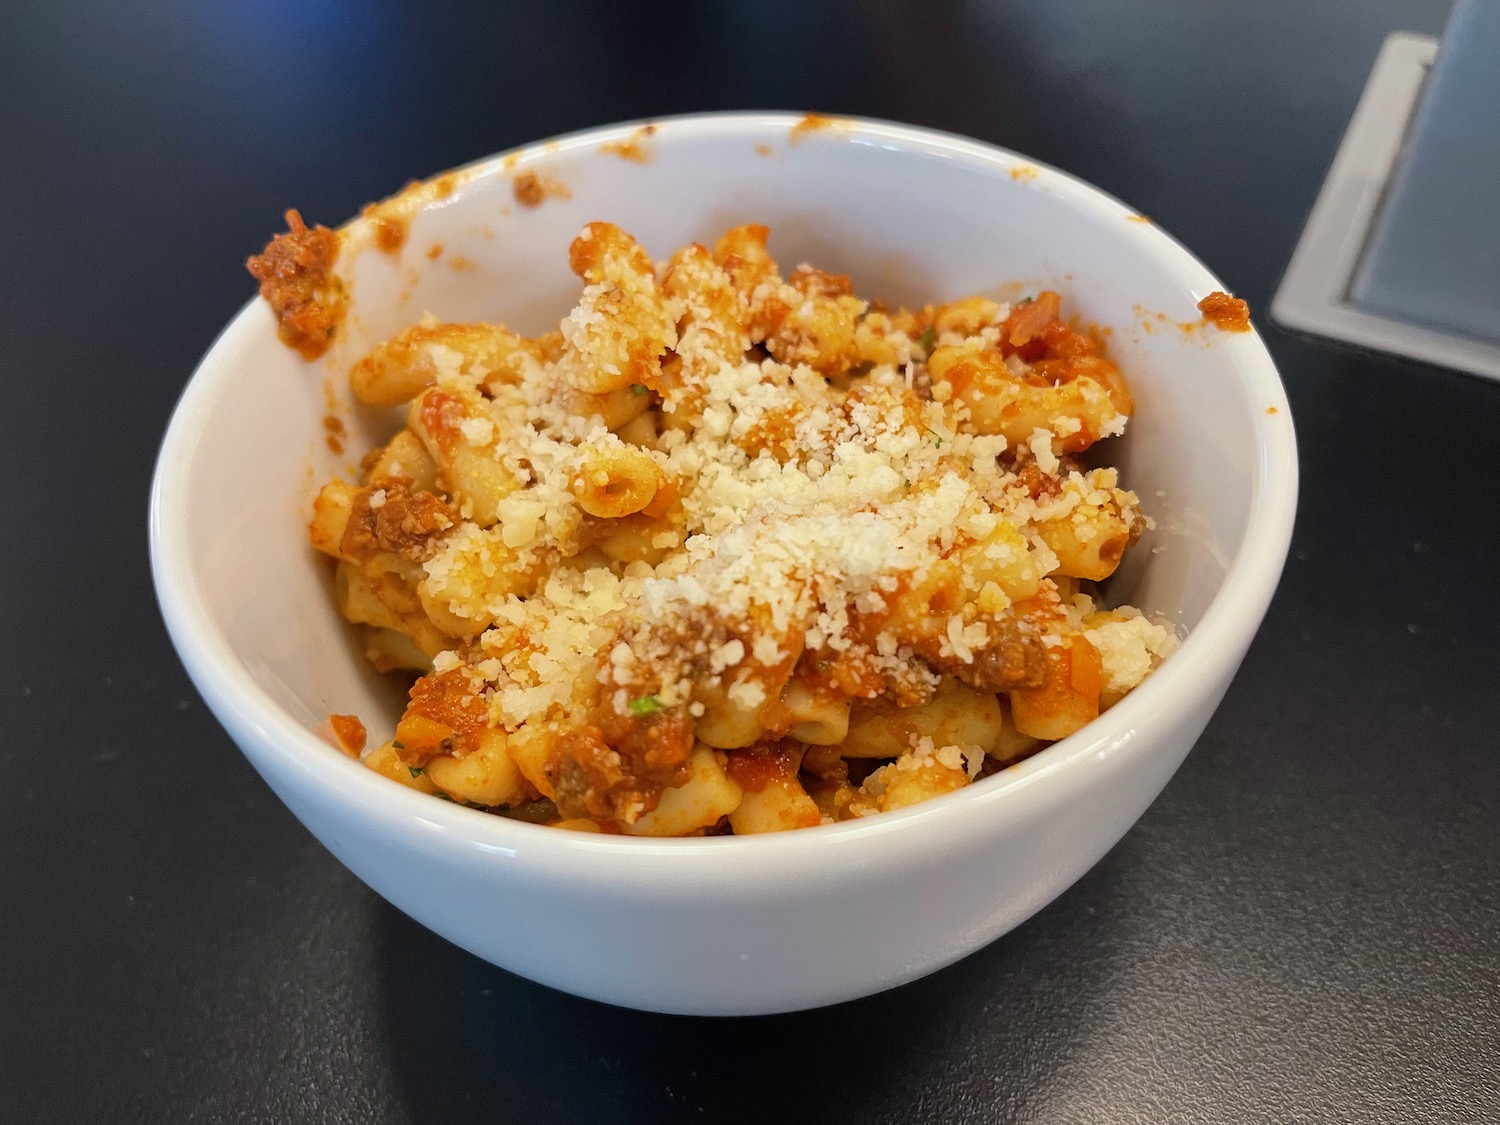 a bowl of pasta with cheese and sauce